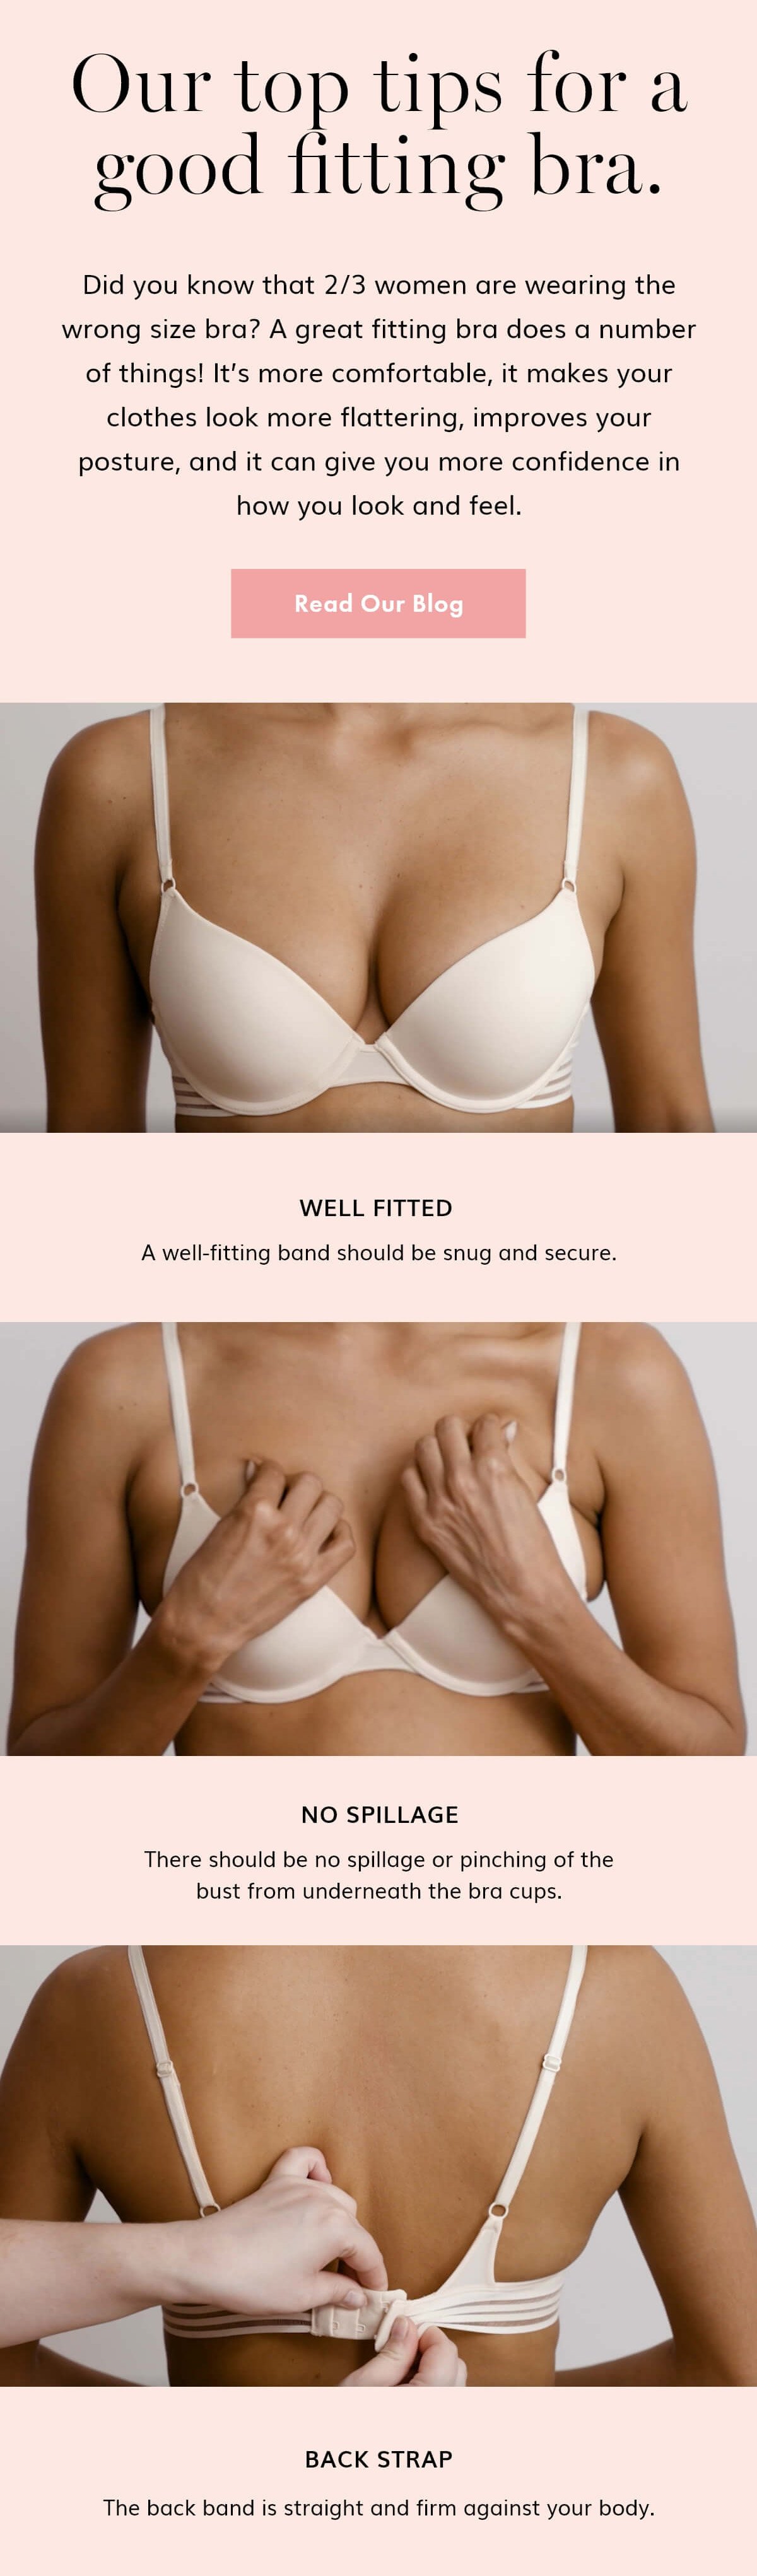 Bras Galore and More - We offer bras for all women including